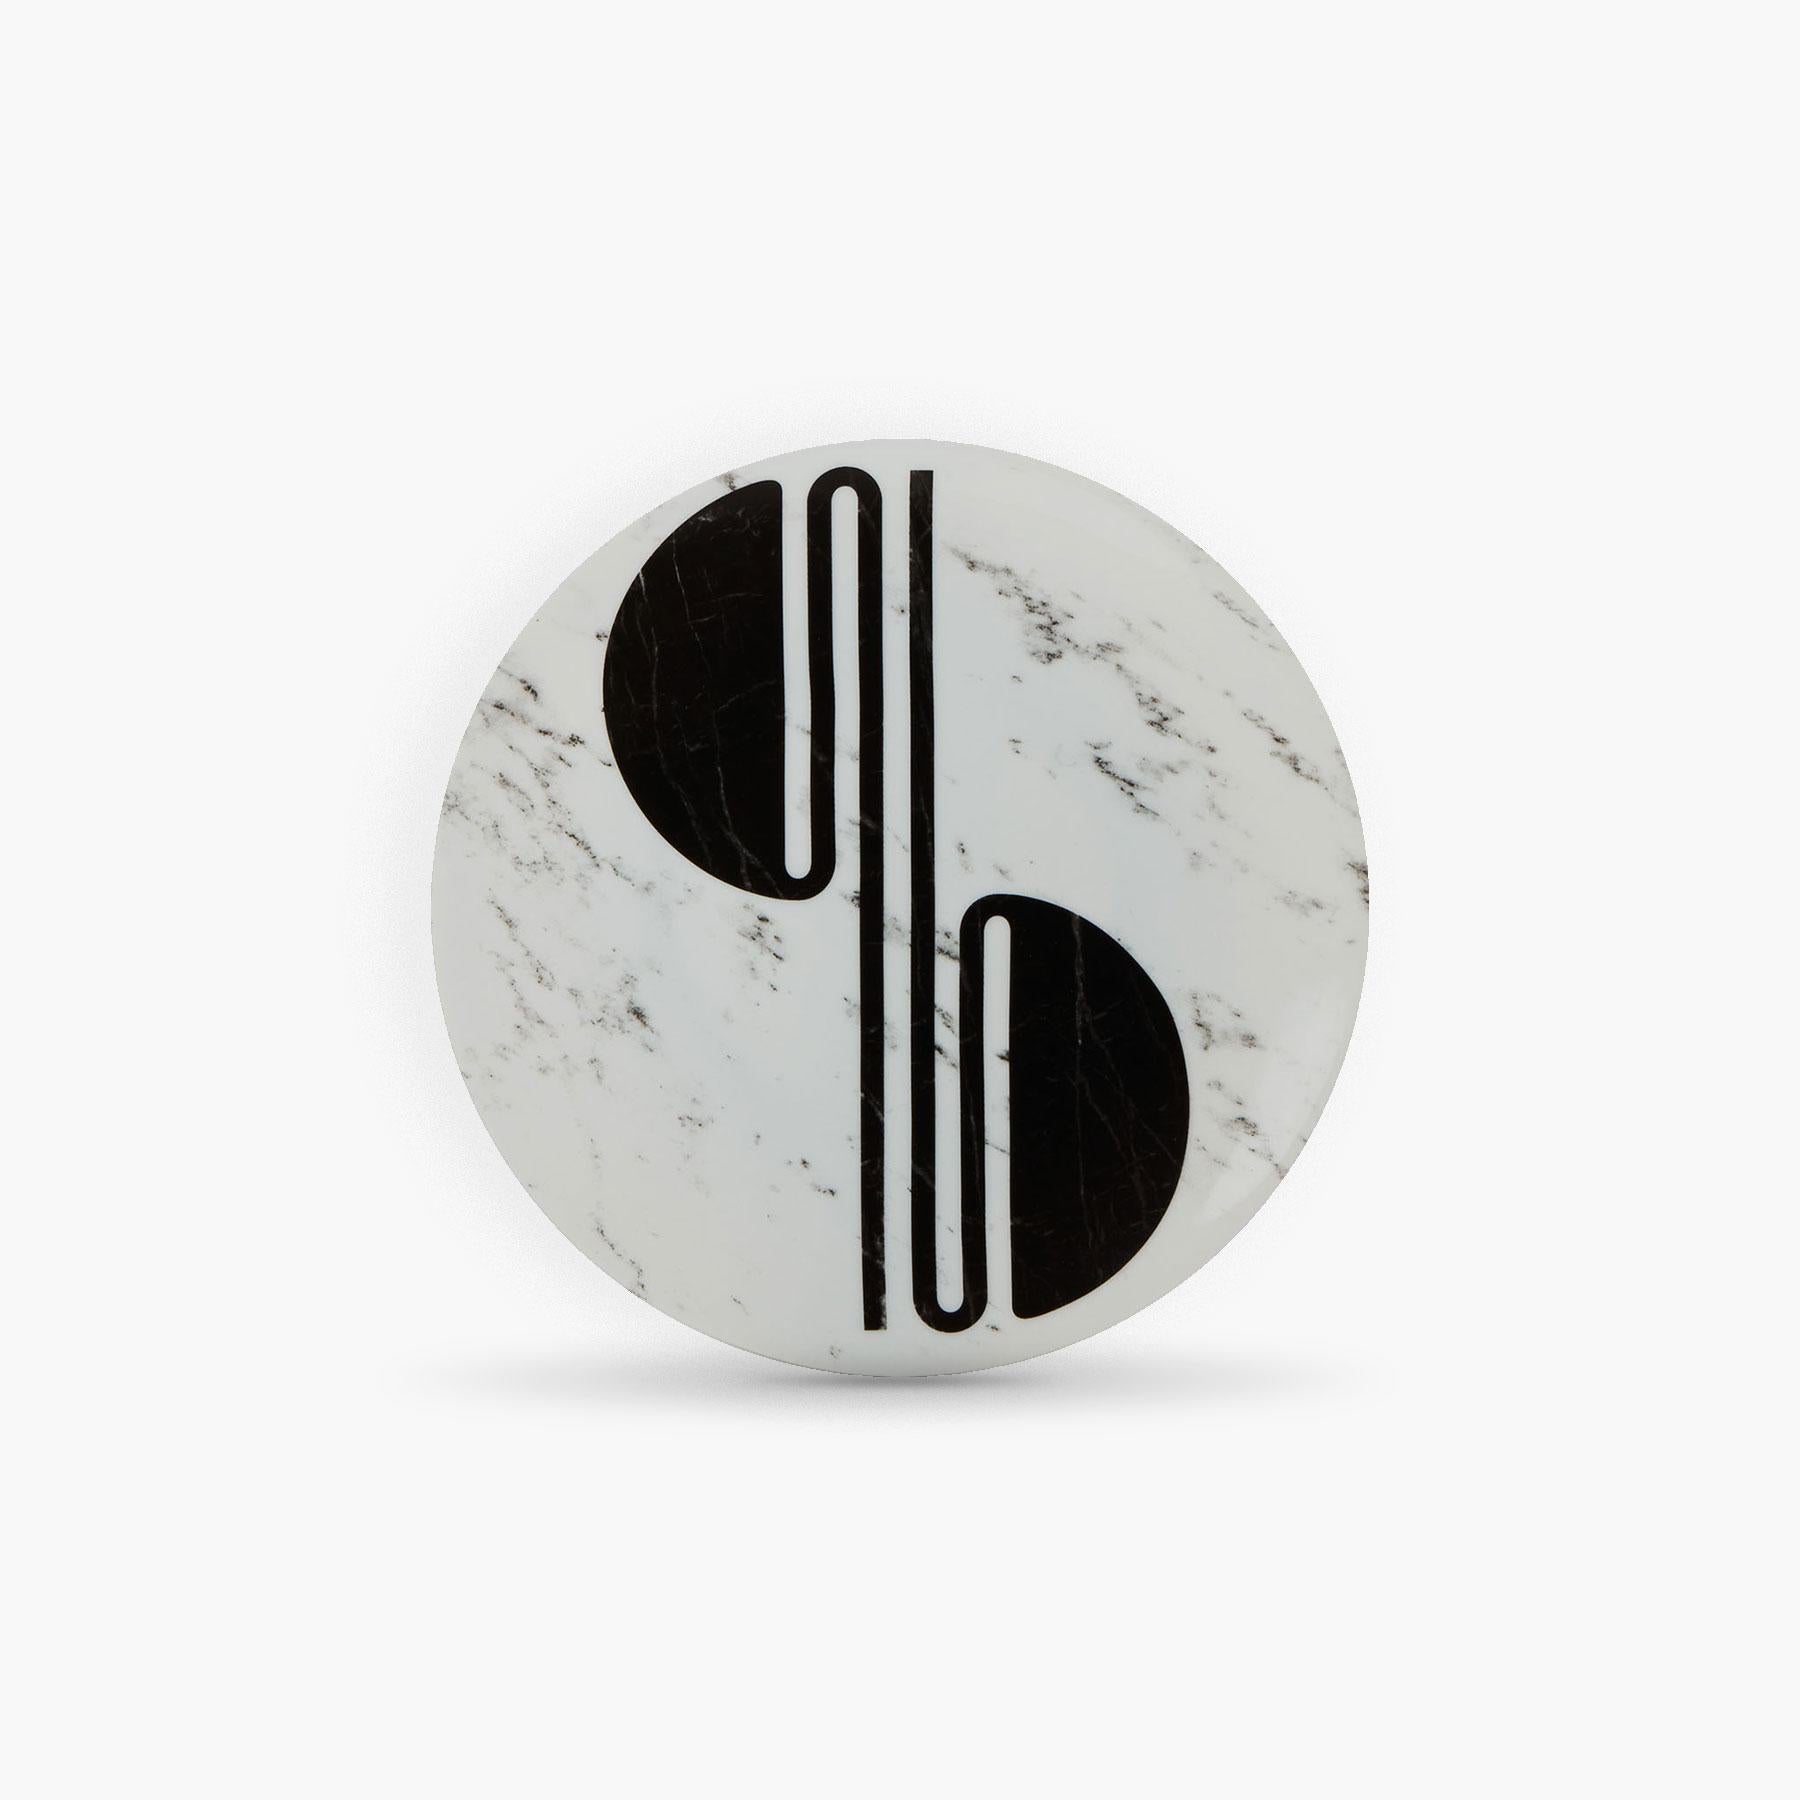 
Etienne Bardelli, plastic artist, interprets in his own way the architecture of Rue de Paradis: A sweet mix between the 1930s and the 1970s.

Porcelain of Limoges extra fine.
Black and white serigraphy.
Diameter: 21 cm 
Height: 1.4 cm
Weight: 0.208